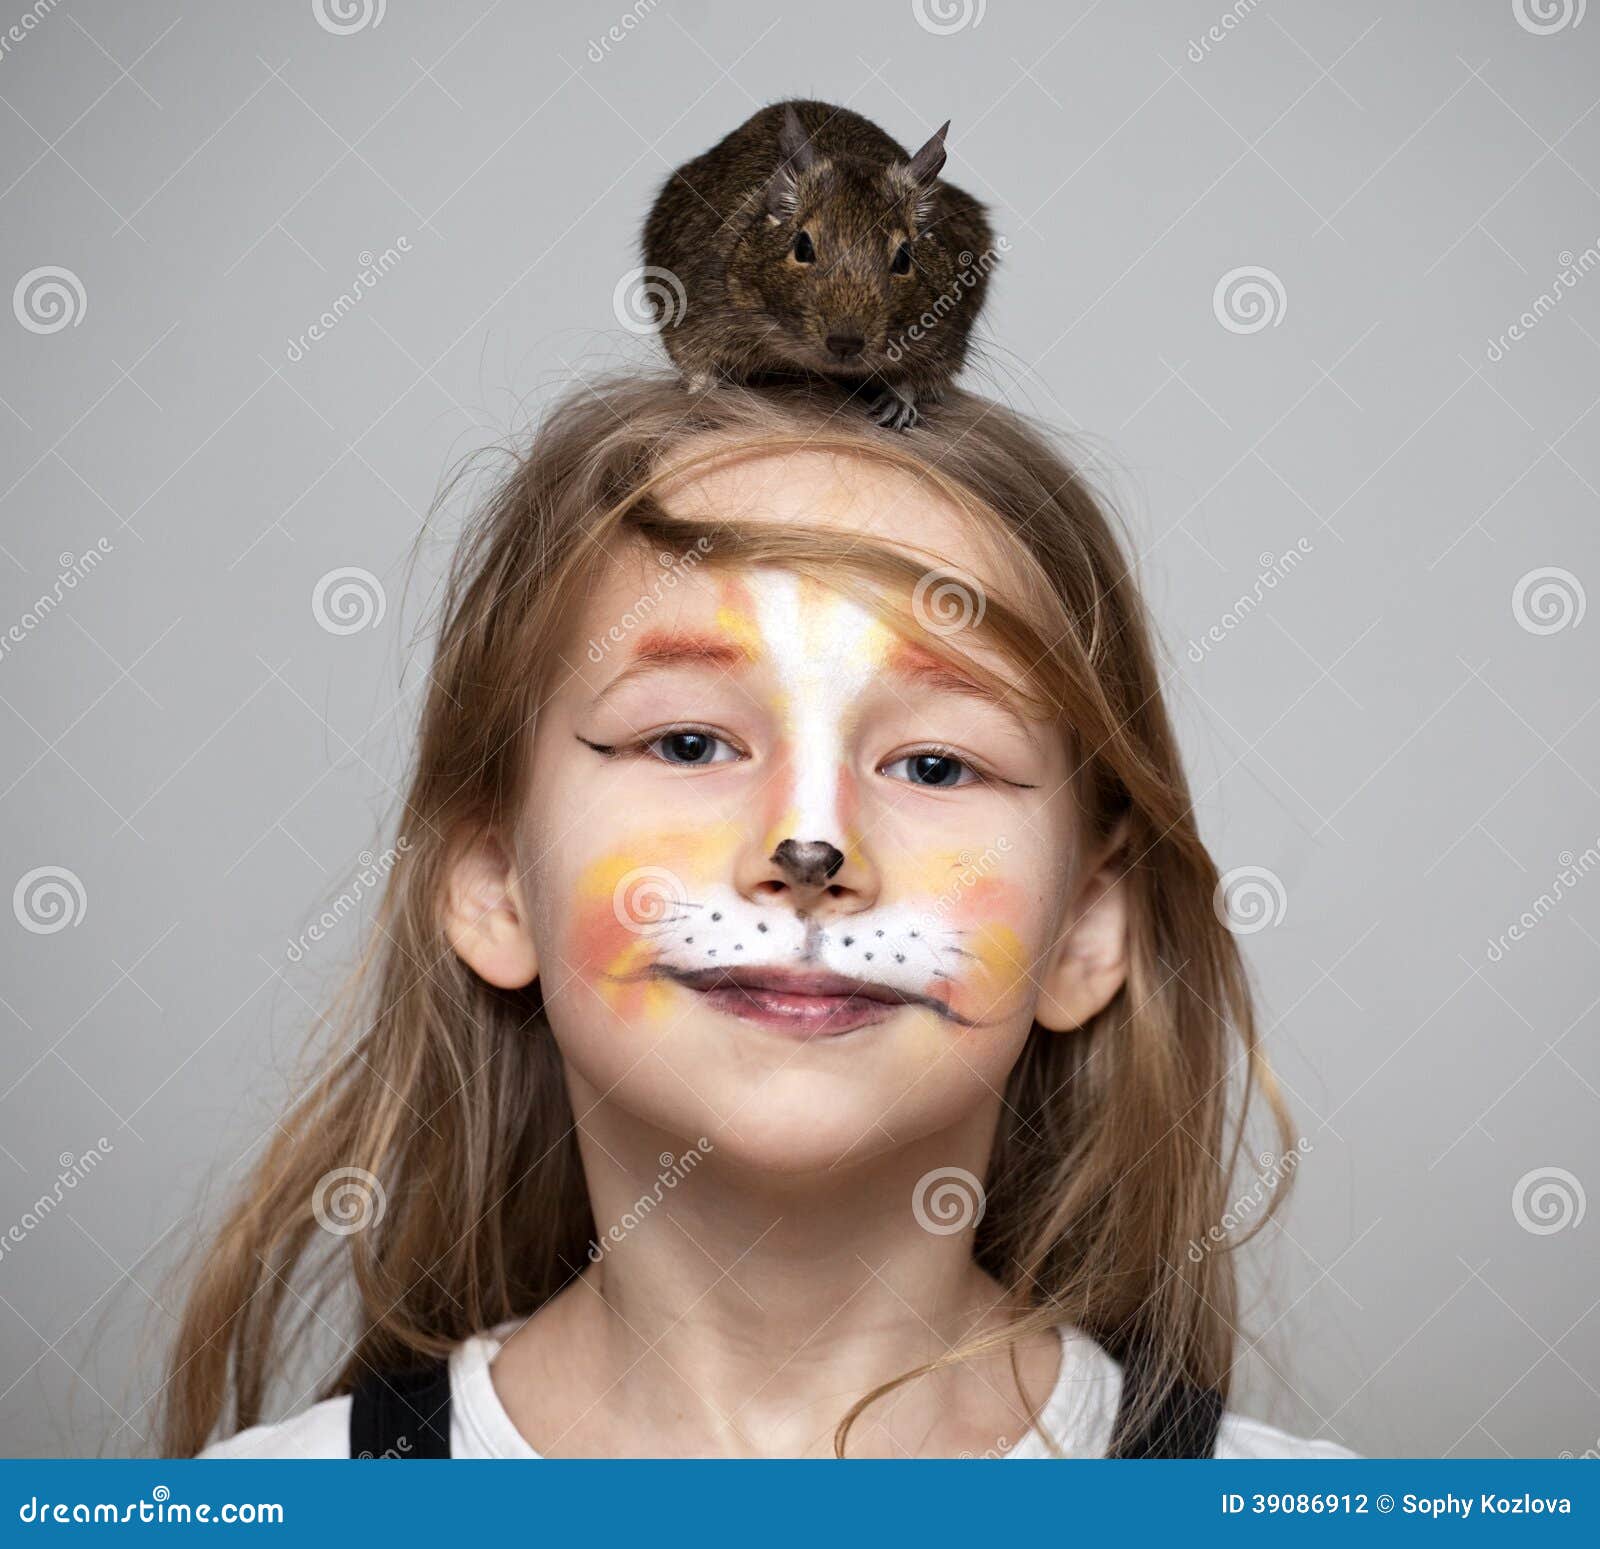 Girl painted as a cat with grey mouse on the head - girl-painted-as-cat-grey-mouse-head-little-makeup-39086912